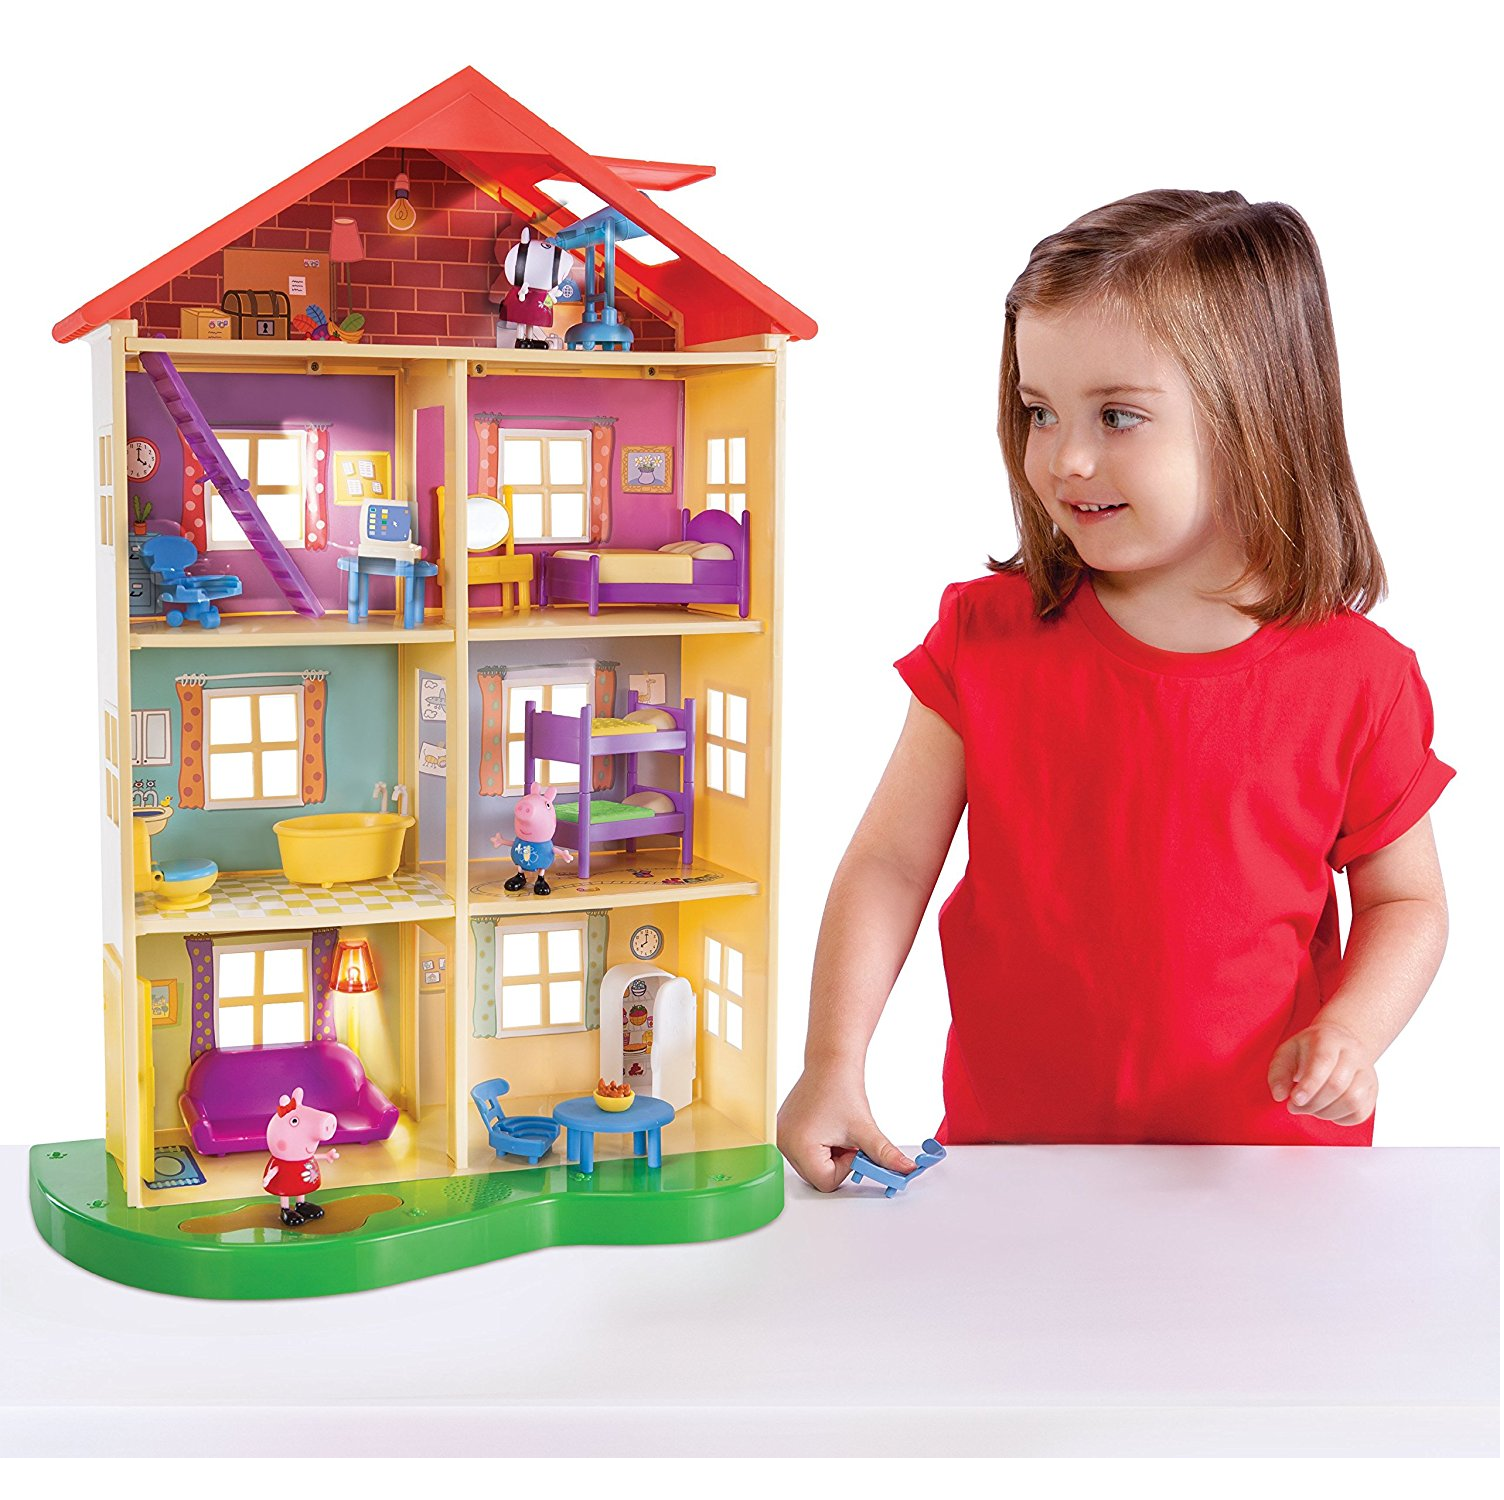 Peppa Pig Lights and Sounds Playset Down to $35.00!